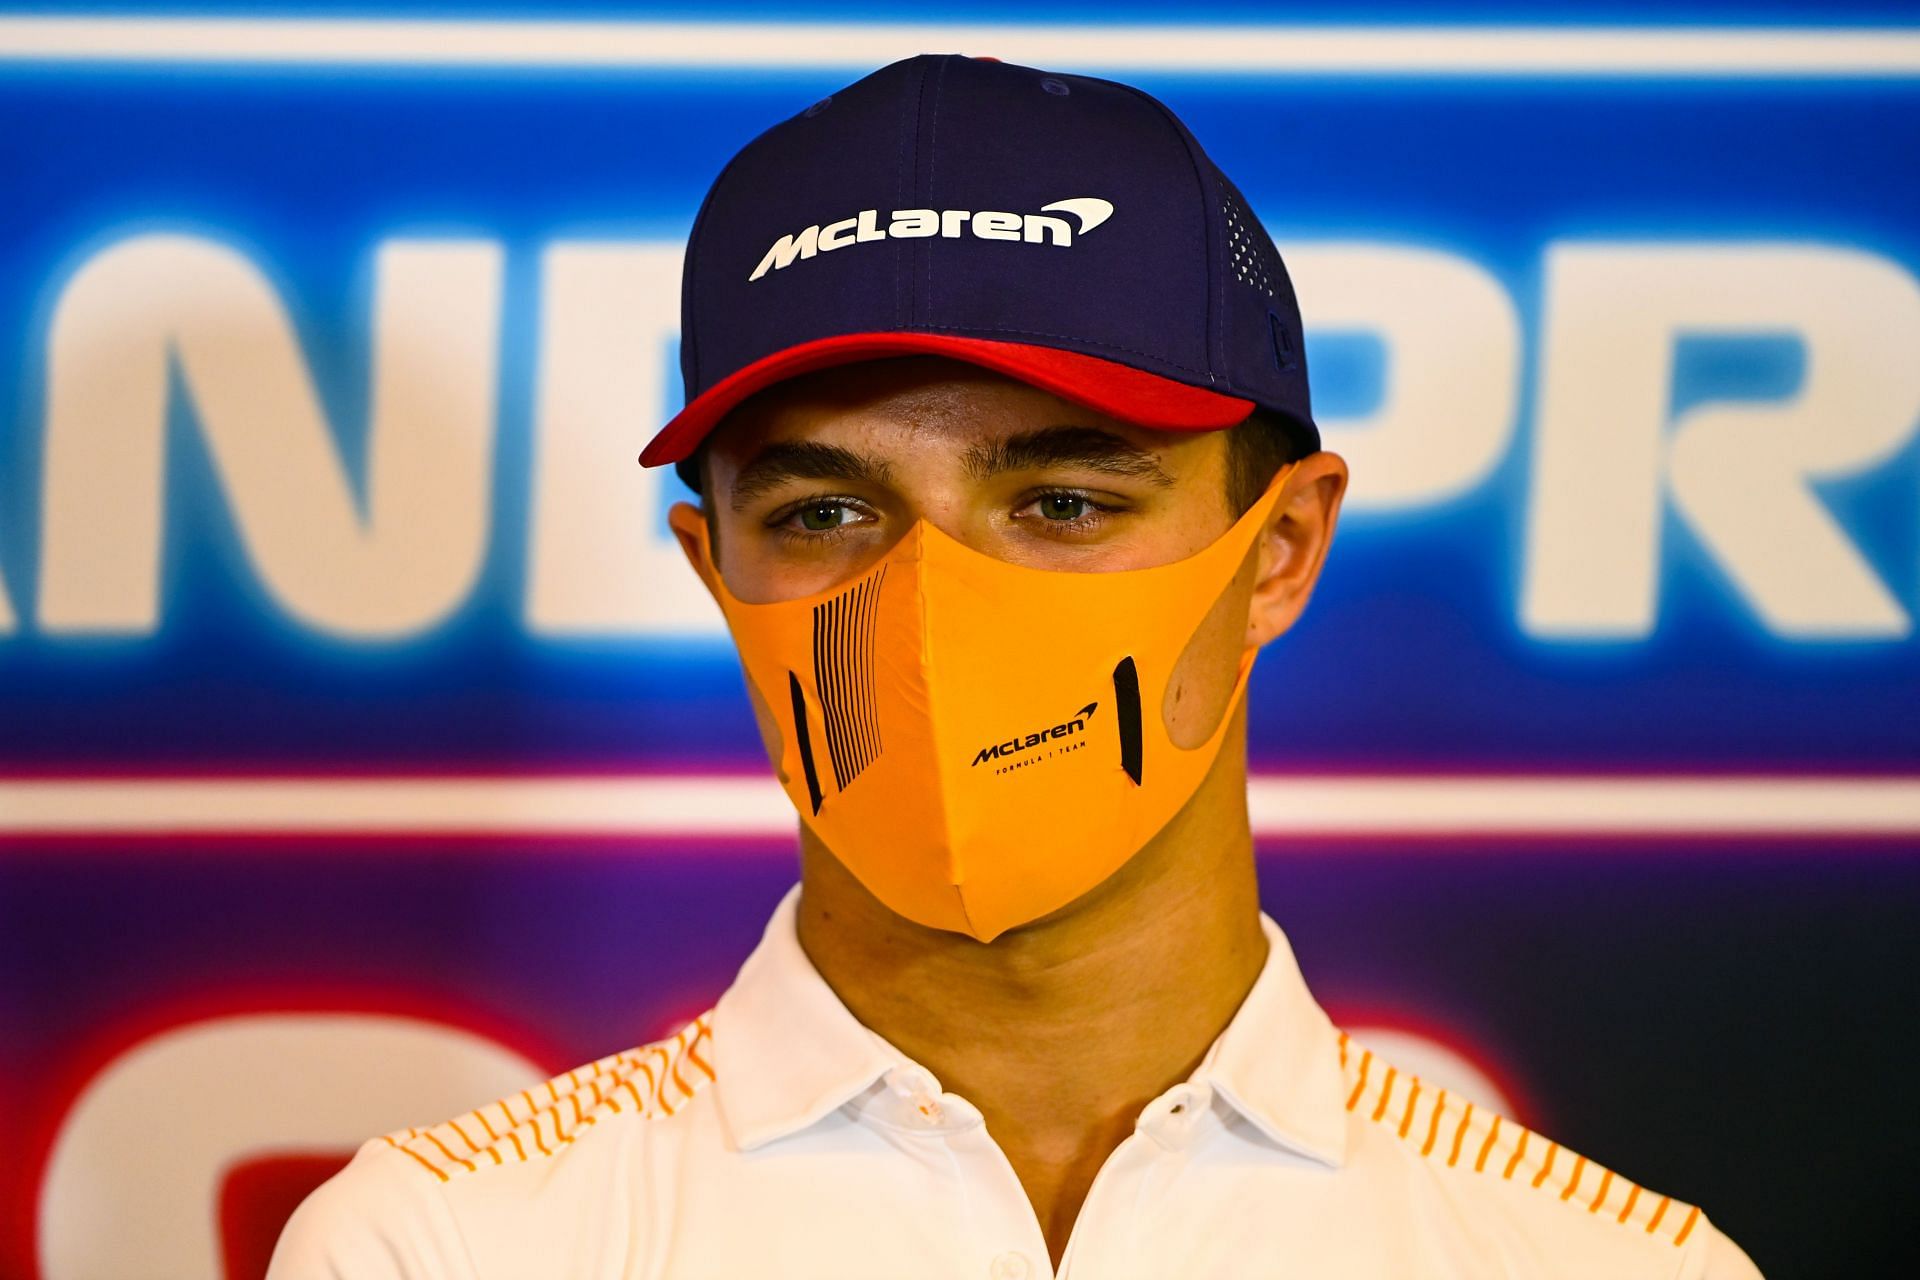 Lando Norris at the drivers press conference during 2021 USGP weekend in Austin, Texas. (Photo by Mark Sutton - Pool/Getty Images)